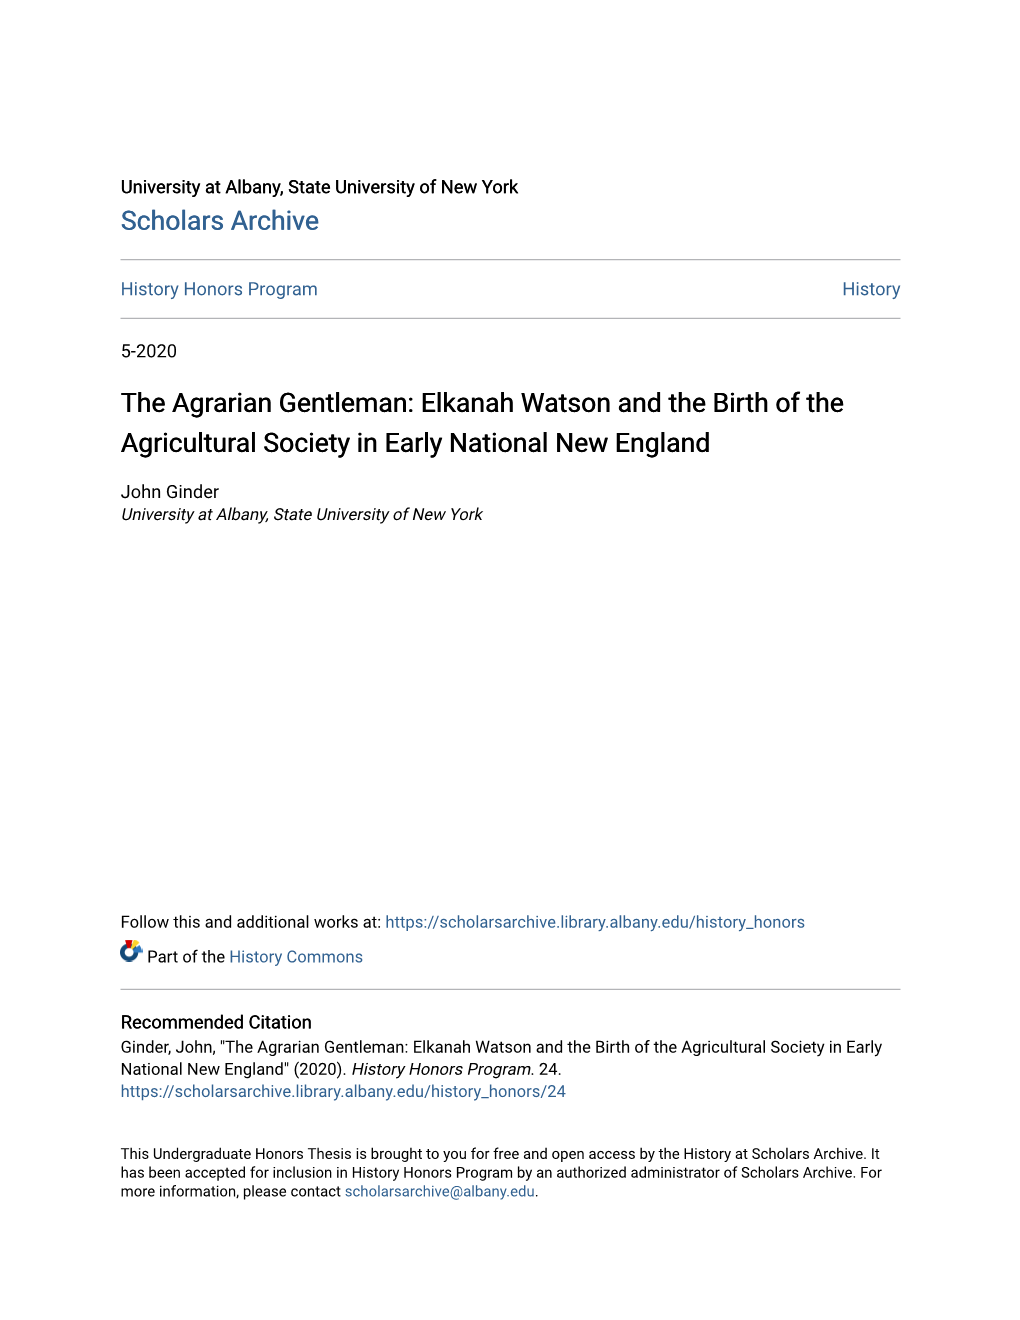 Elkanah Watson and the Birth of the Agricultural Society in Early National New England